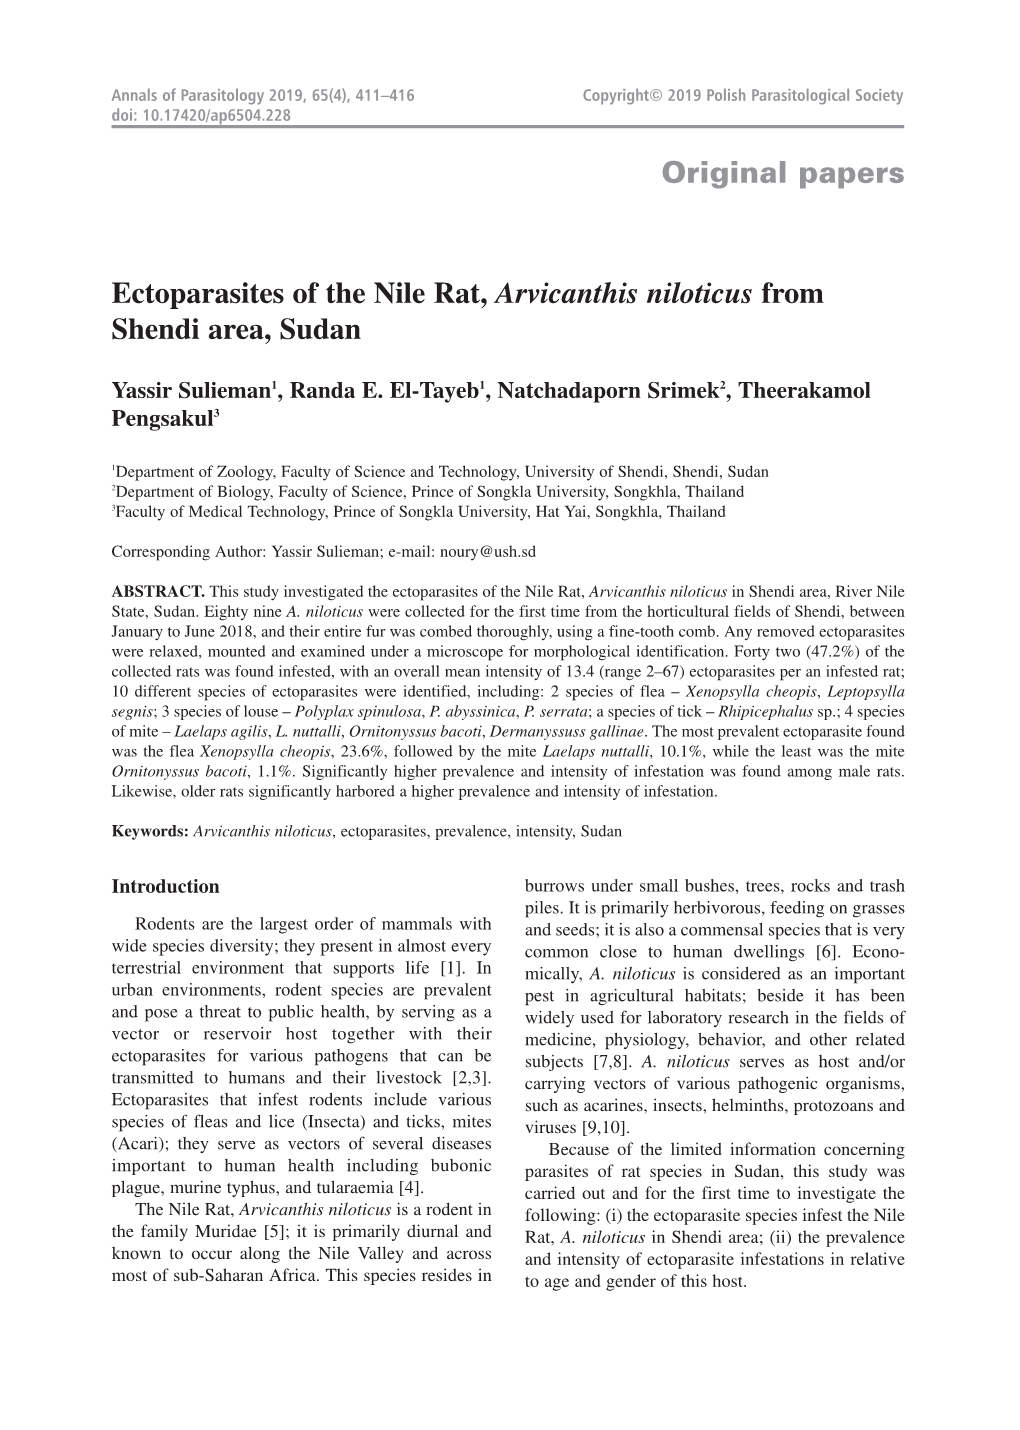 Original Papers Ectoparasites of the Nile Rat, Arvicanthis Niloticus From